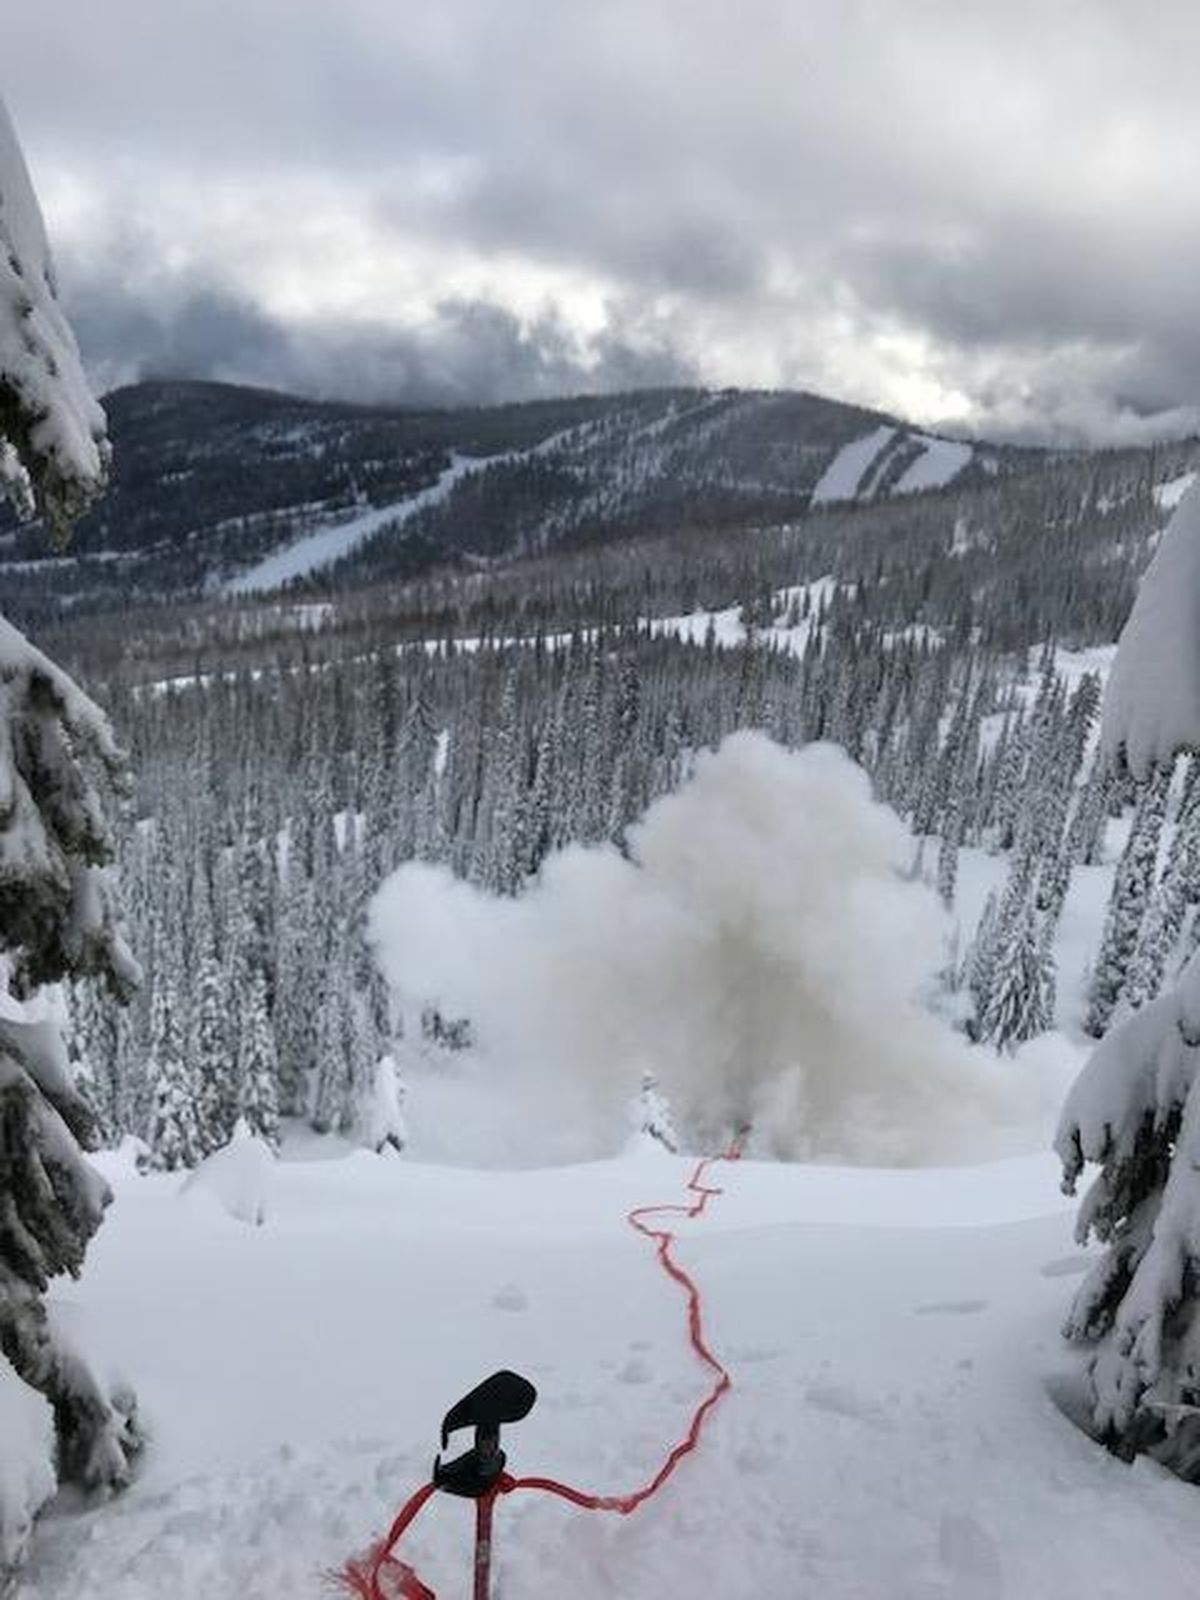 Schweitzer Ski Patrol used explosives to successfully control an in-bounds avalanche in the North Bowl, Thursday. (Ben Nachlas / Courtesy)